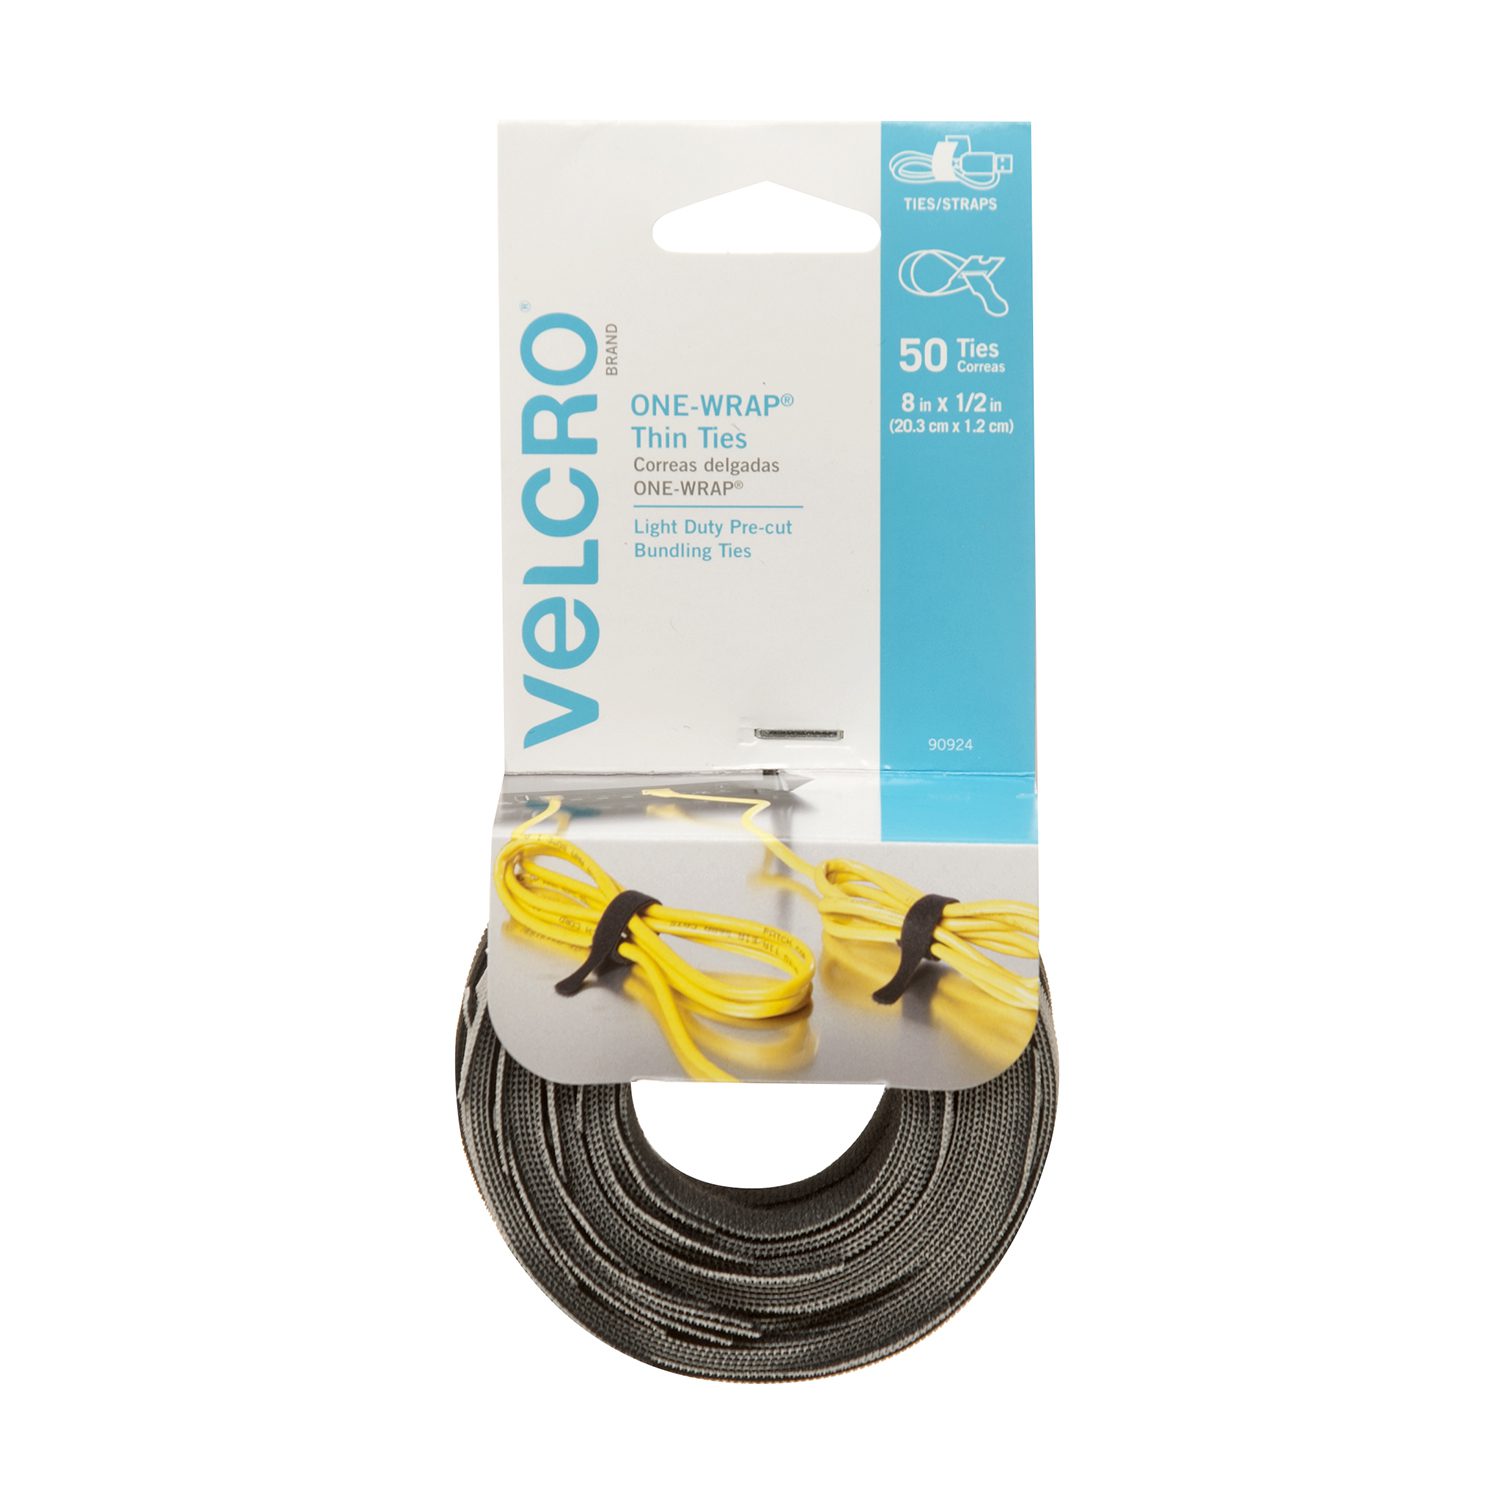  VELCRO Brand Fire Retardant Cable Ties, 50pk ONE-WRAP FR Cable  Straps for Contractors, Installers or Home Use, 8 Inch PreCut Cable  Management Ties